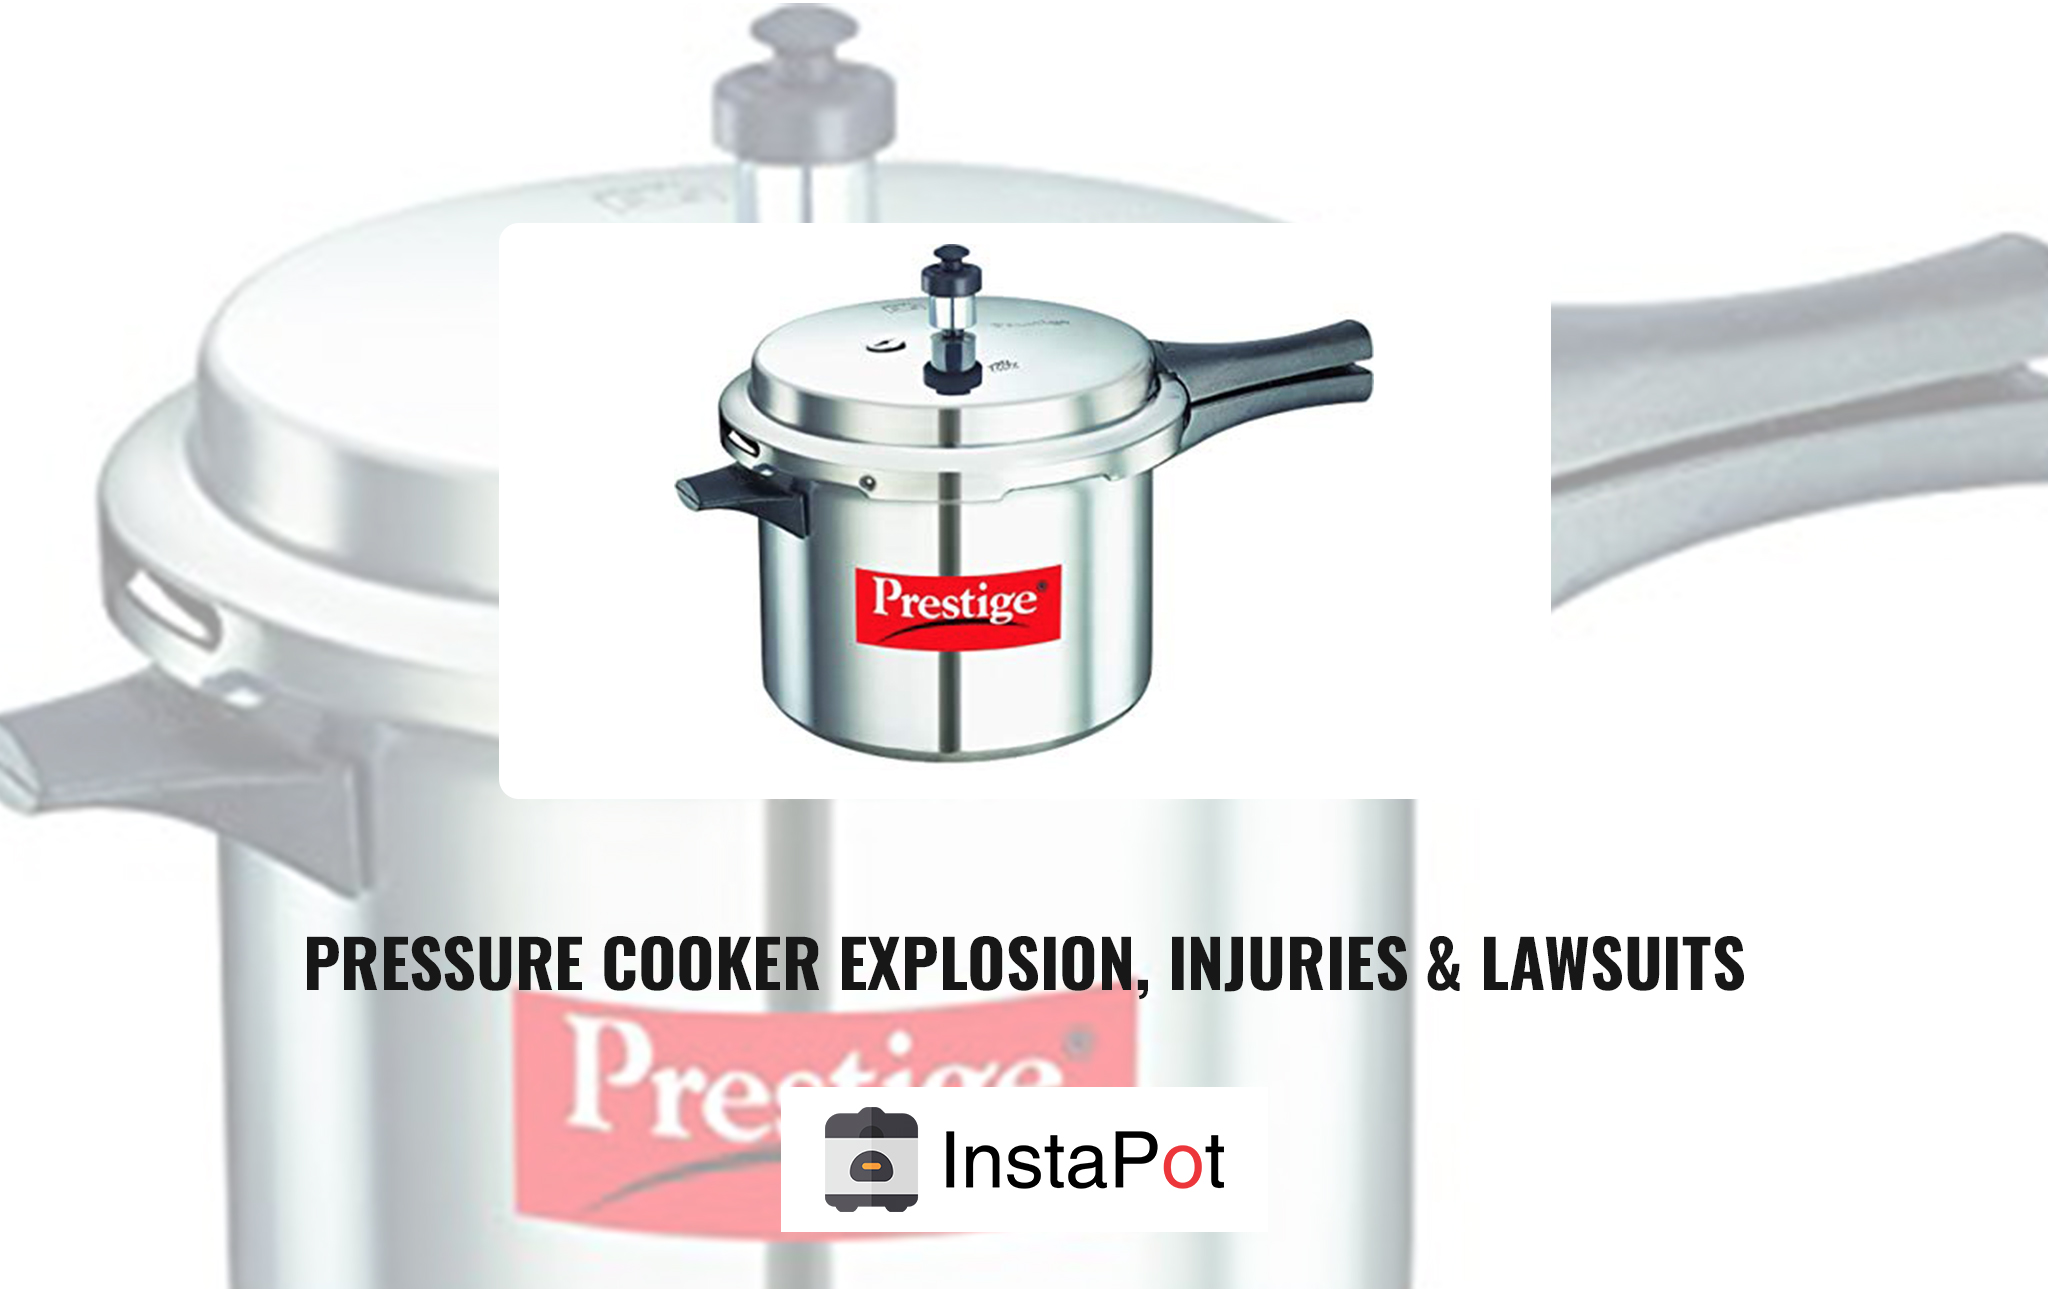 Pressure Cooker Explosion, Injuries & Lawsuits